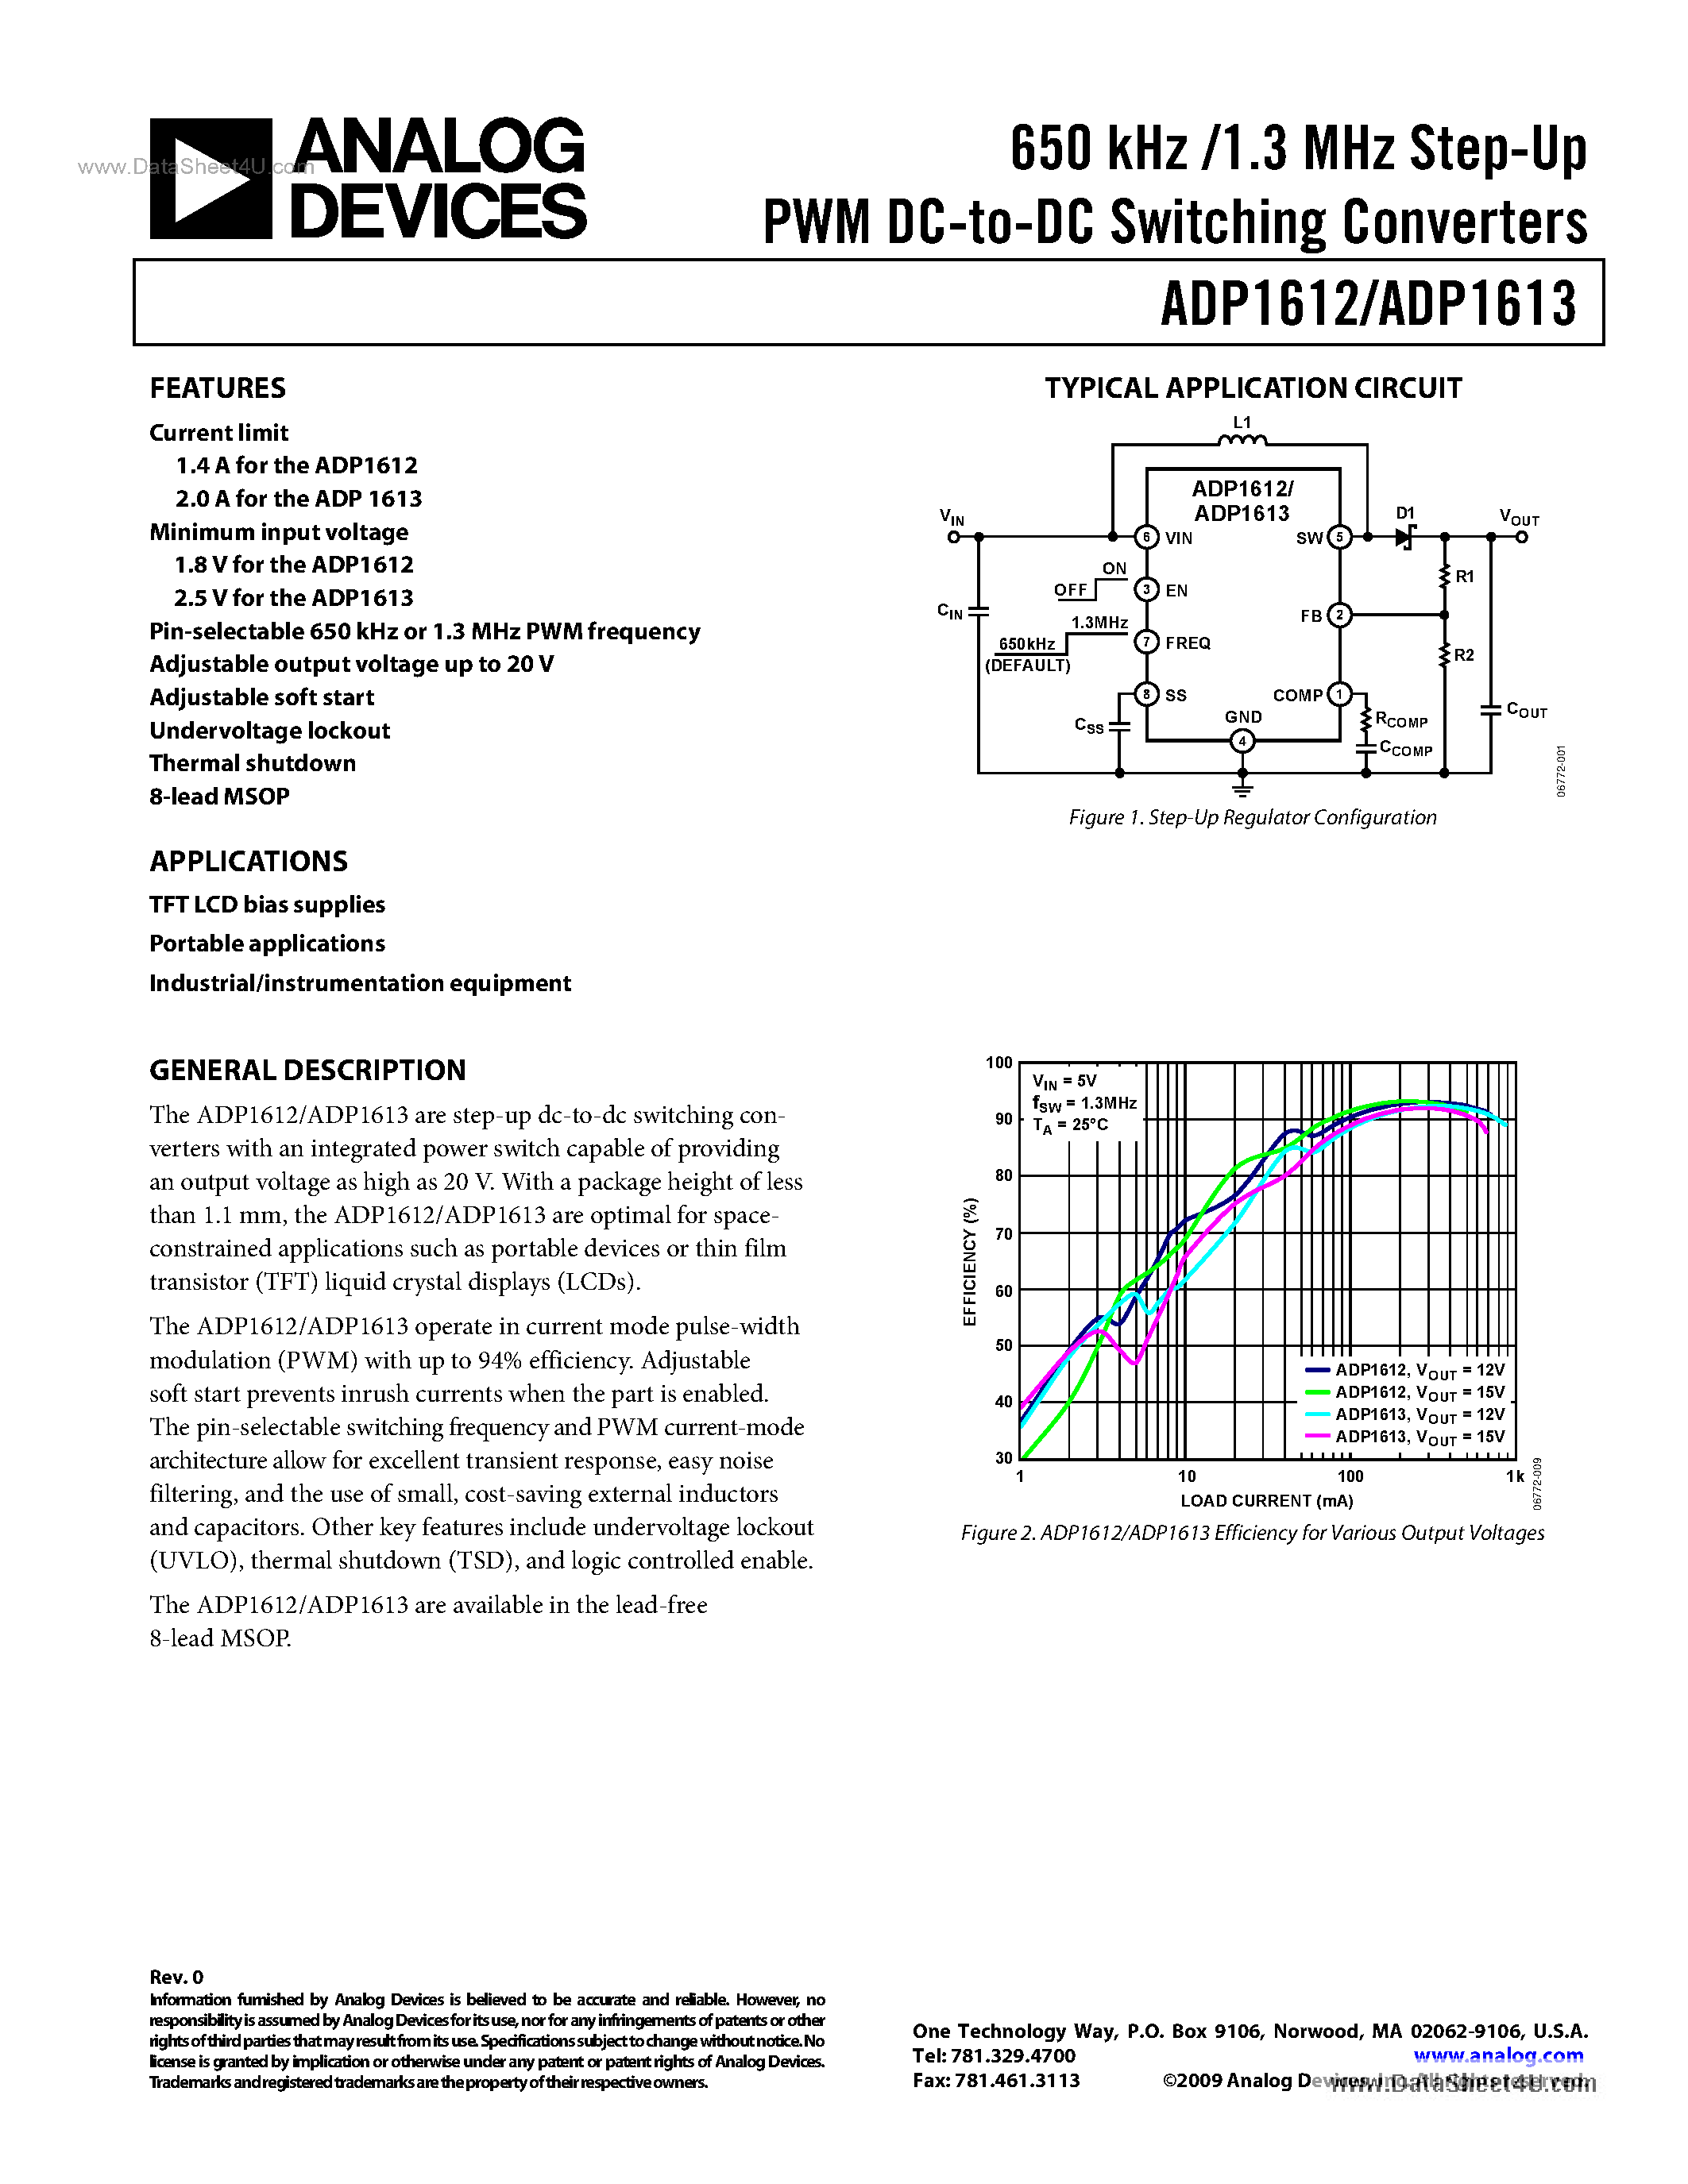 Datasheet ADP1612 - (ADP1612 / ADP1613) 650 KHz /1.3 MHz Step-Up PWM DC-to-DC Switching Converter page 1